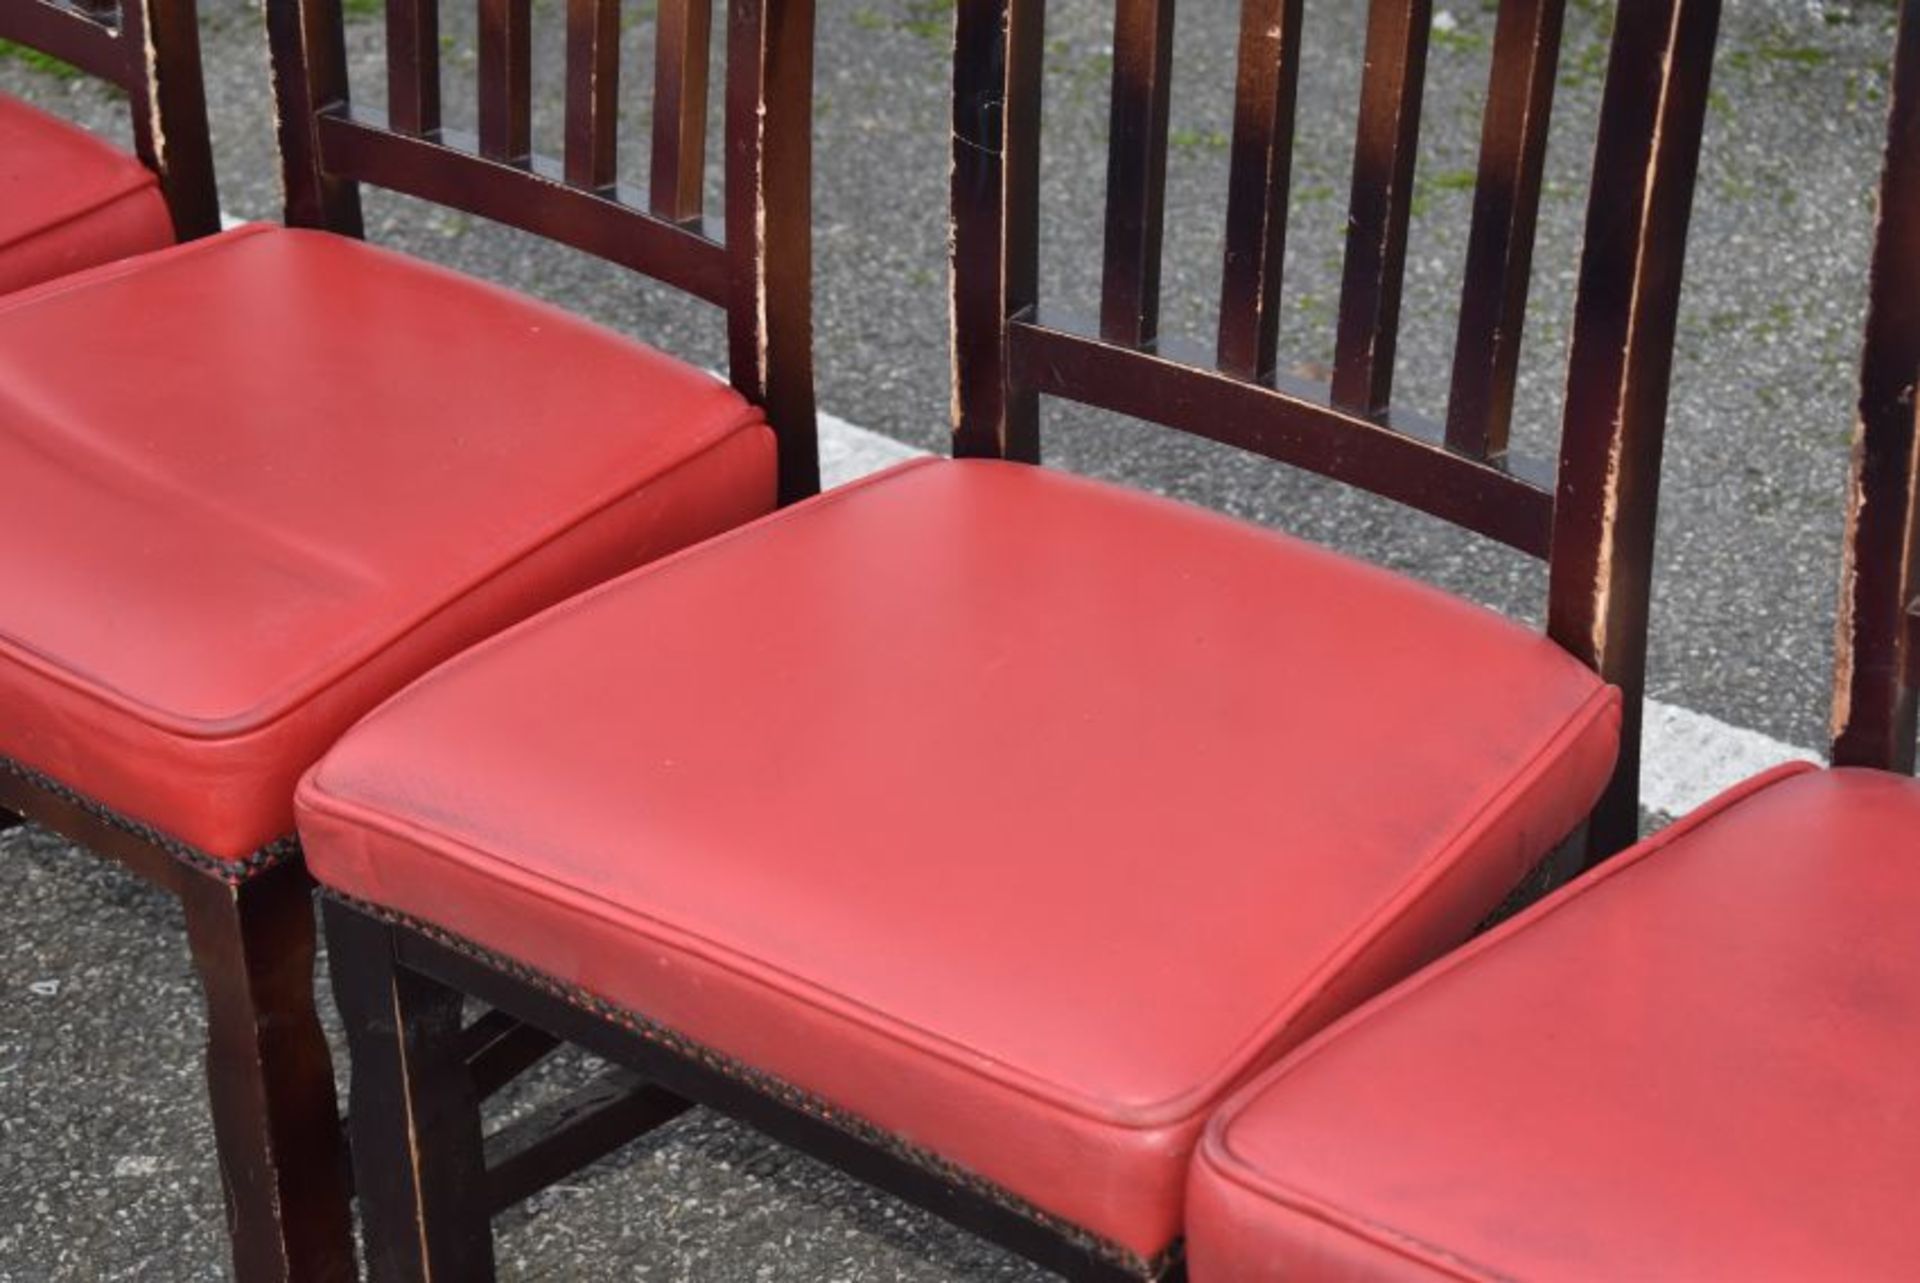 8 x Restaurant Dining Chairs With Dark Stained Wood Finish and Red Leather Seat Pads - Recently - Image 3 of 6